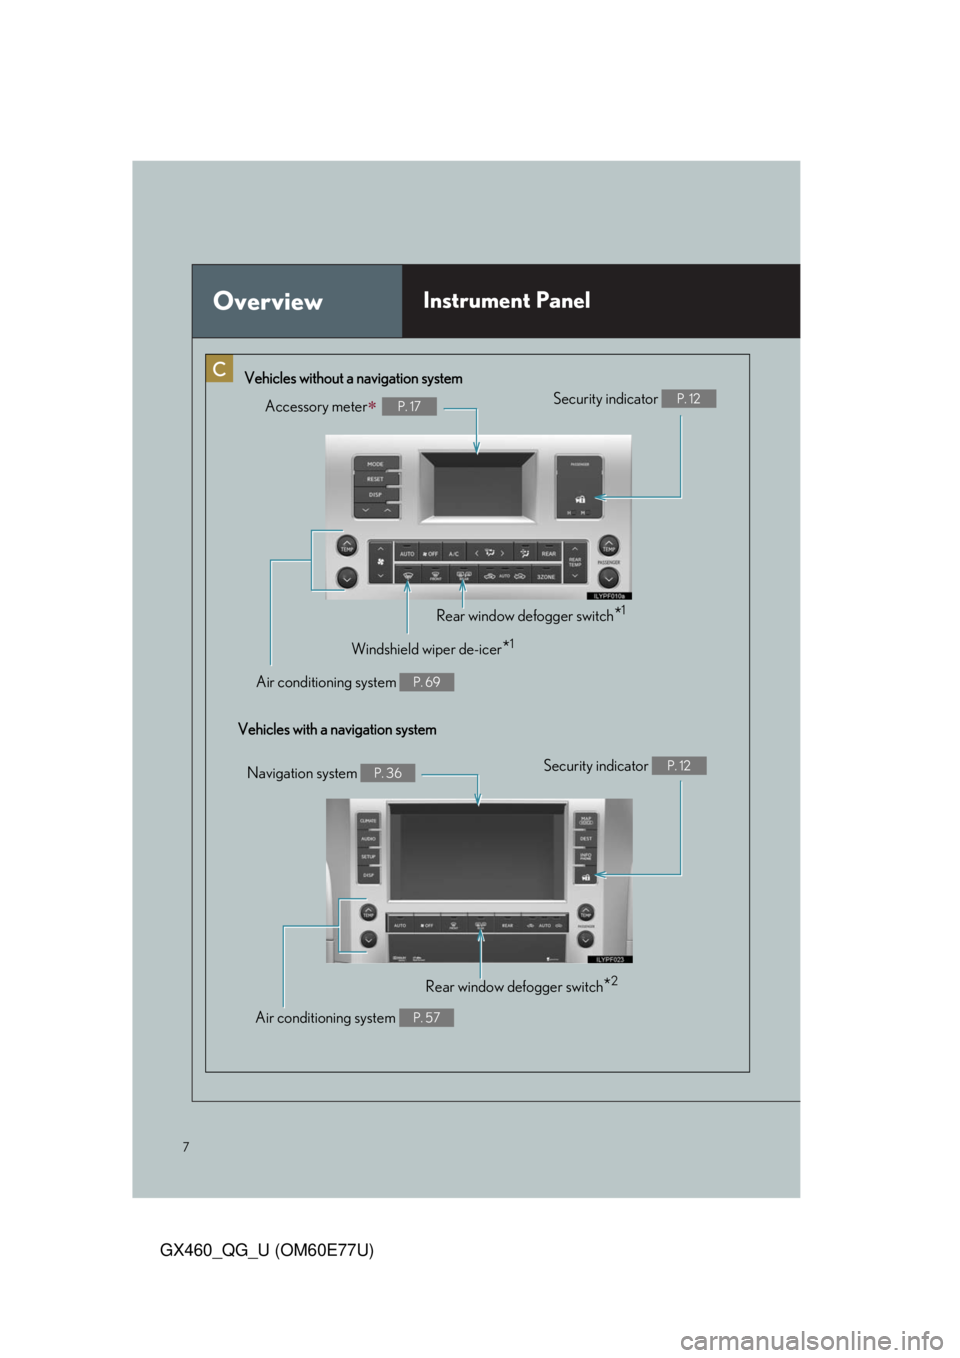 Lexus GX460 2010  Operating Other Driving Systems / LEXUS 2010 GX460 OWNERS MANUAL QUICK GUIDE (OM60E77U) 7
GX460_QG_U (OM60E77U)
OverviewInstrument Panel
Accessory meterP. 17
Vehicles without a navigation system
Vehicles with a navigation systemSecurity indicator 
P. 12
Rear window defogger switch*